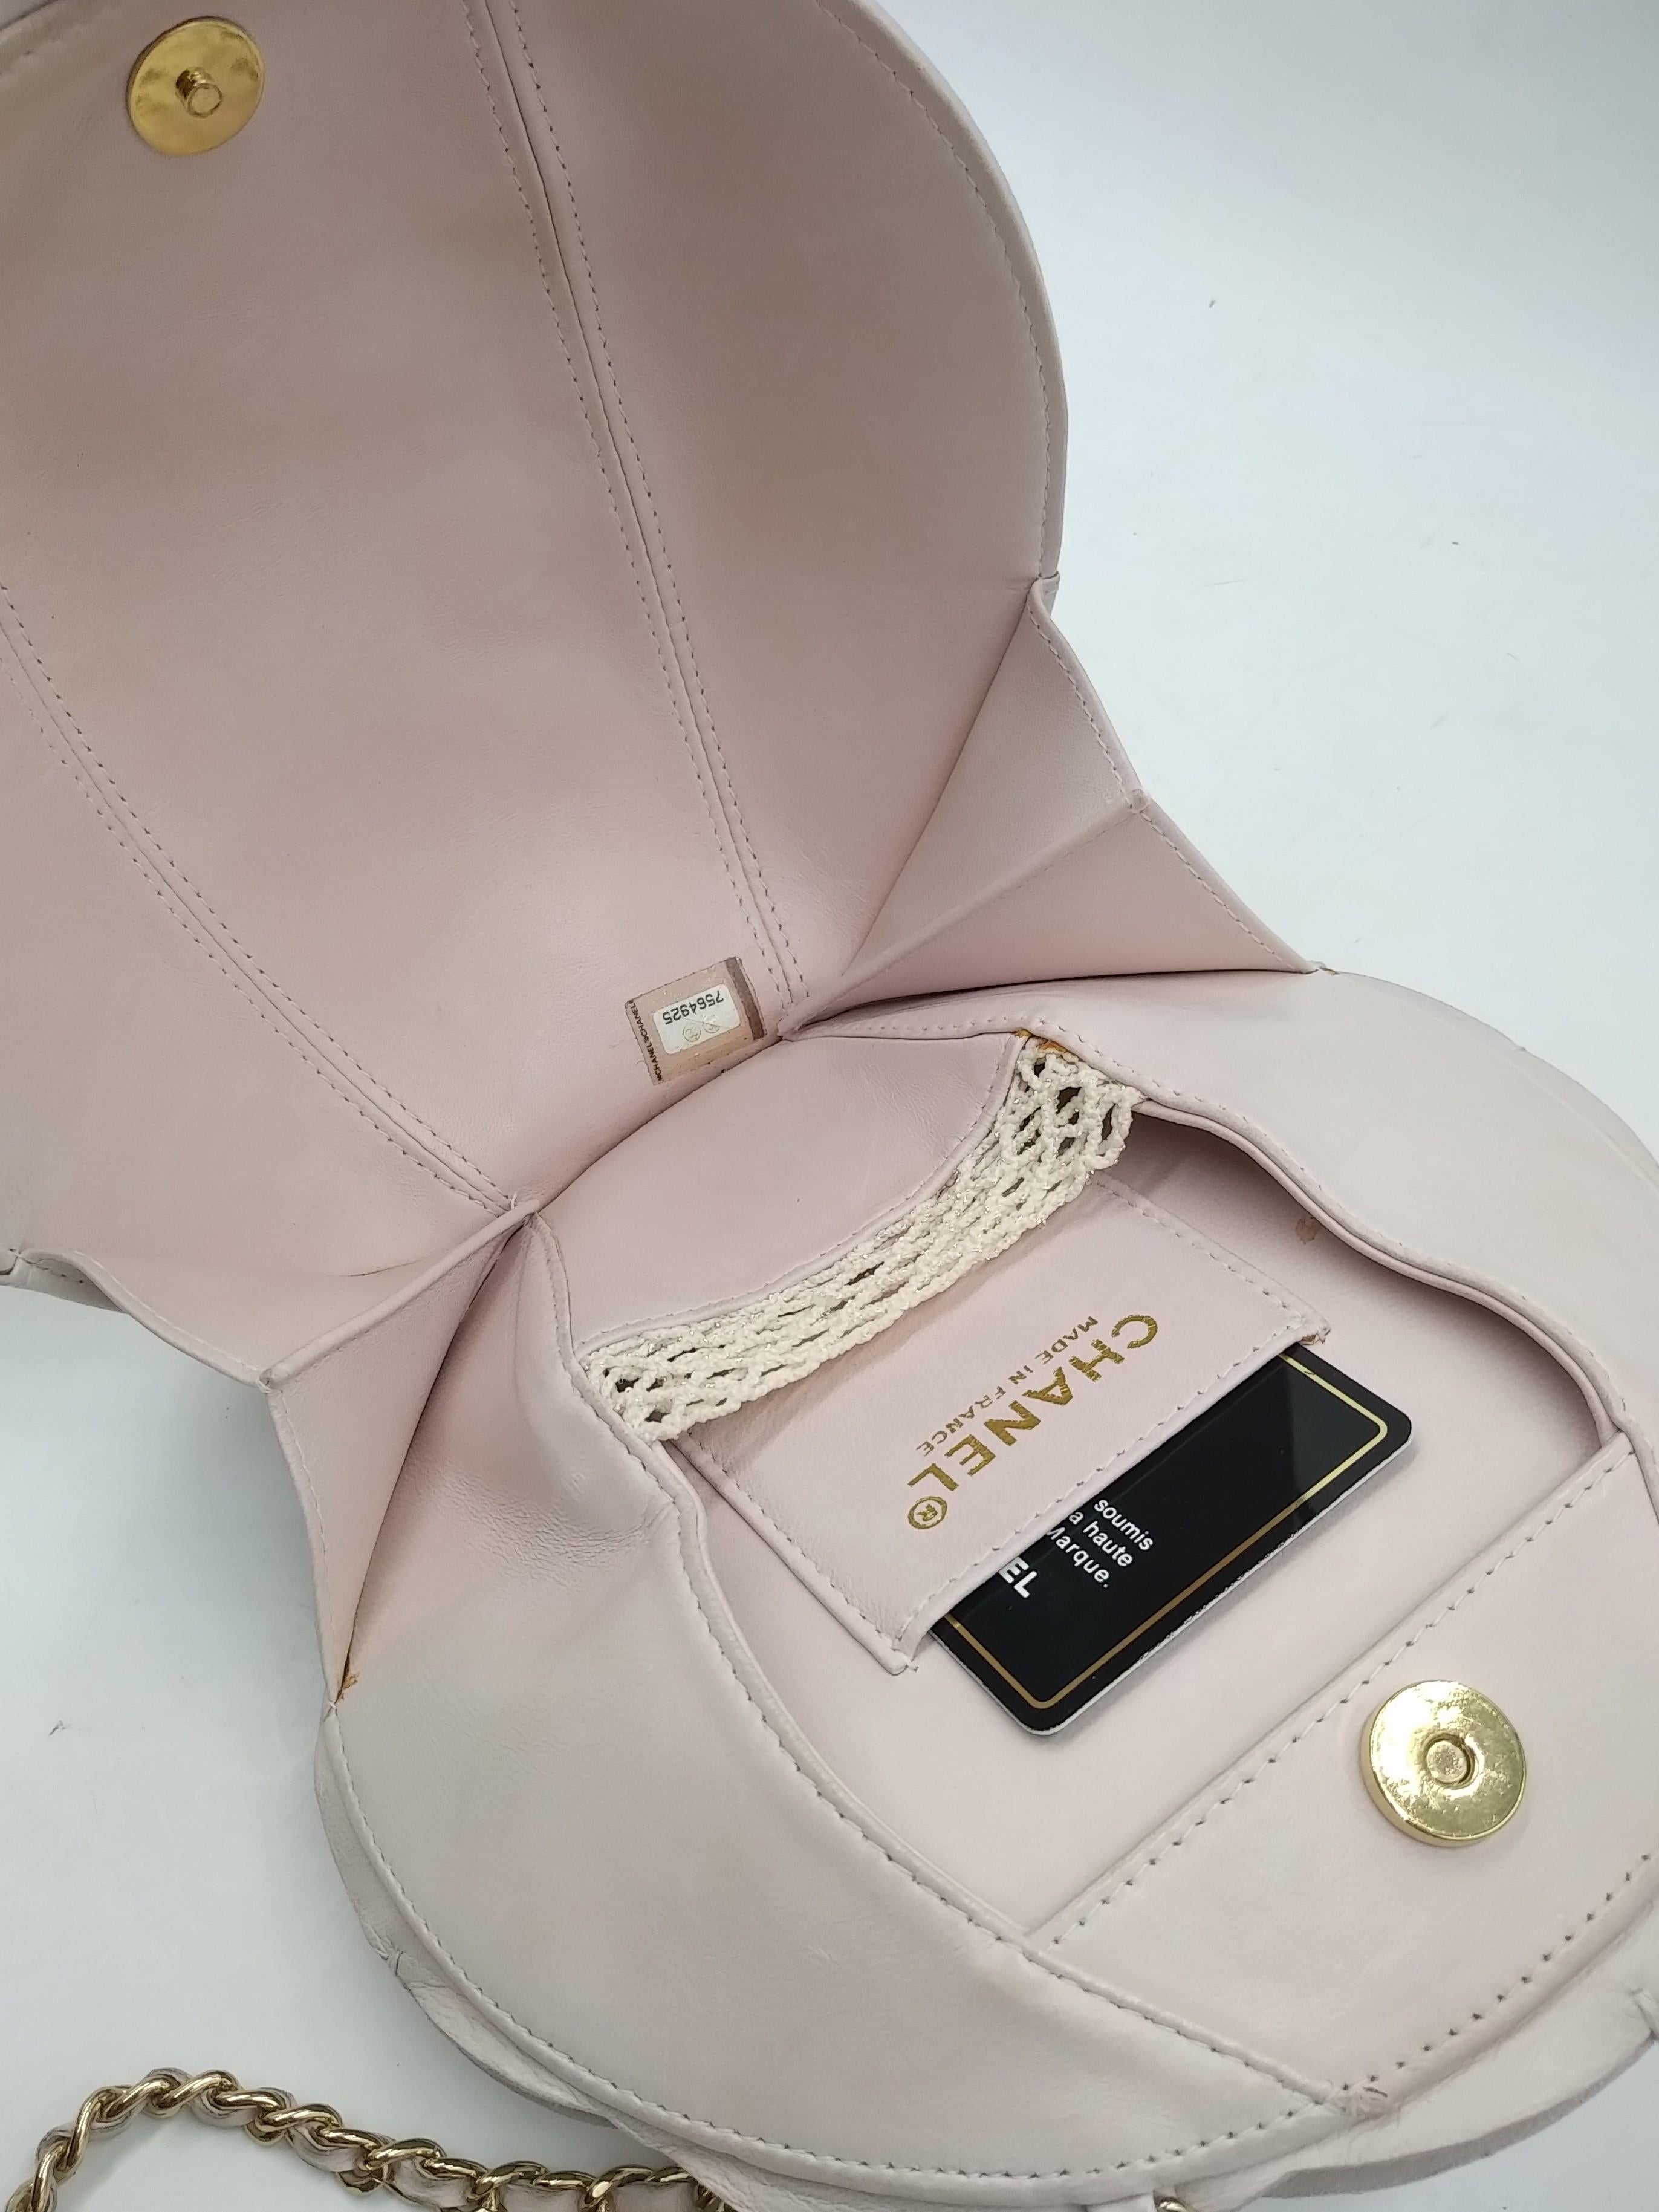 Chanel Light Pink Leather Camellia Flower Bag In Good Condition For Sale In Lugano, Ticino